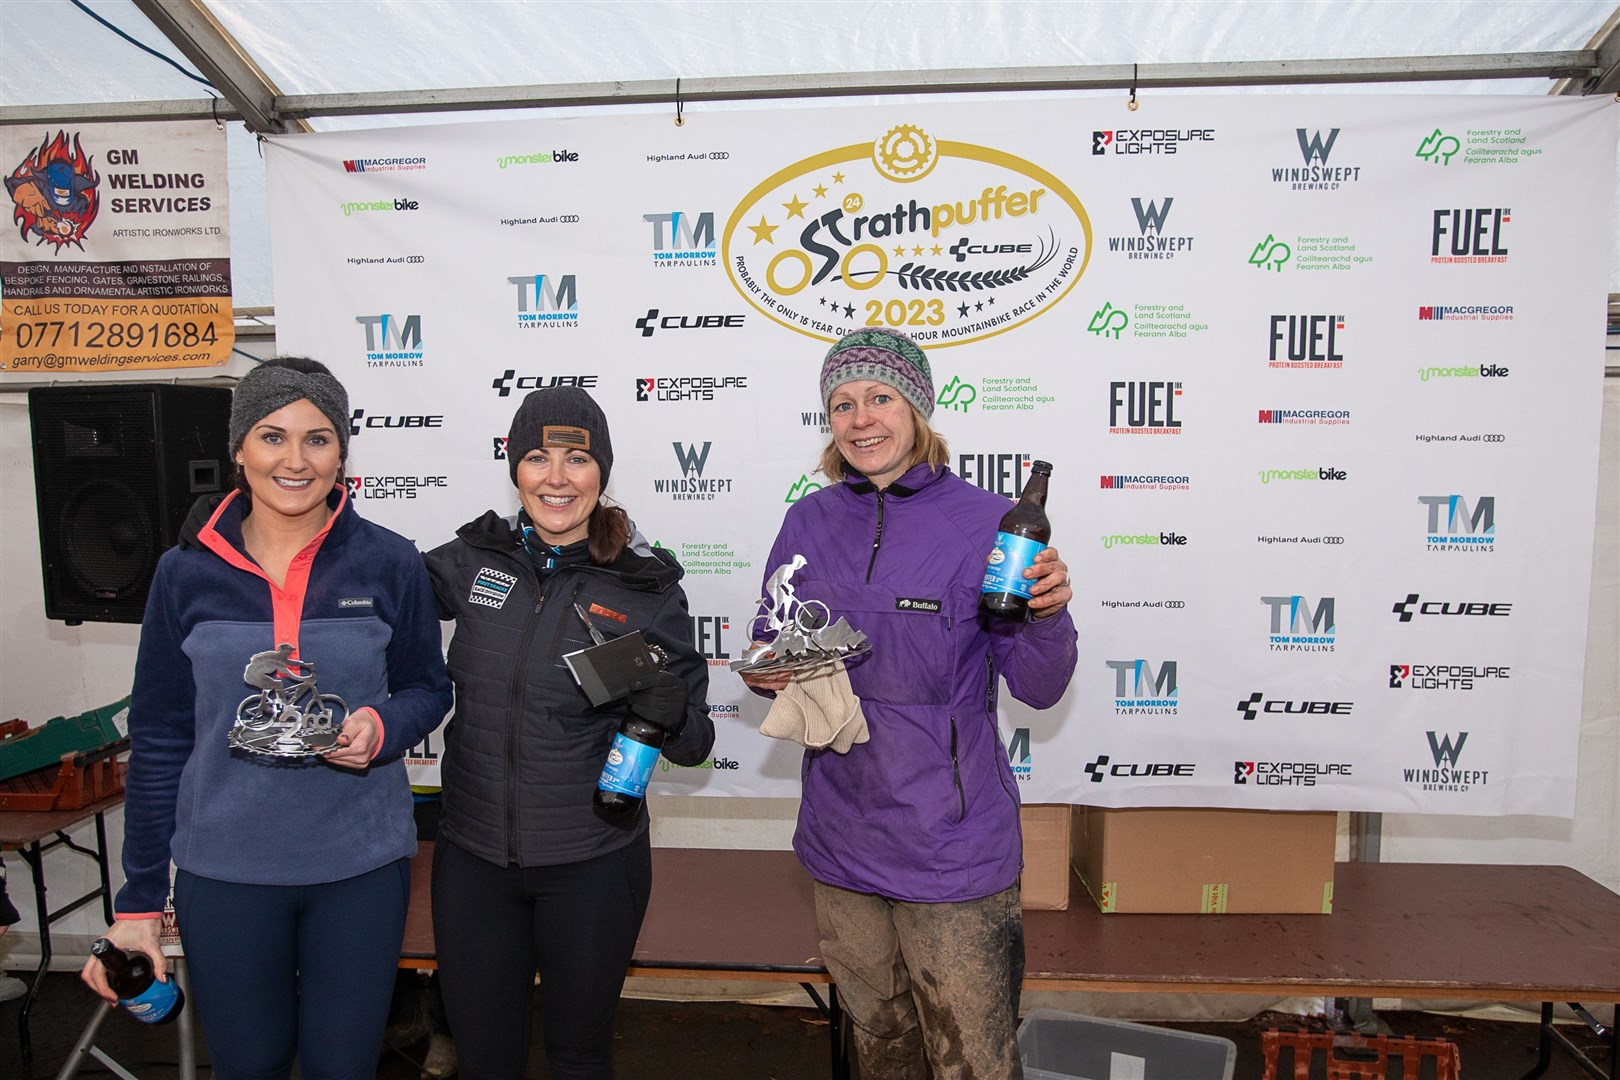 Gemma Baird (right) pictured with Catherine O'Brien and Catriona Wheeler who came joint second. Clare Taylor who finished third was not present at podium. Picture: Gary Williamson